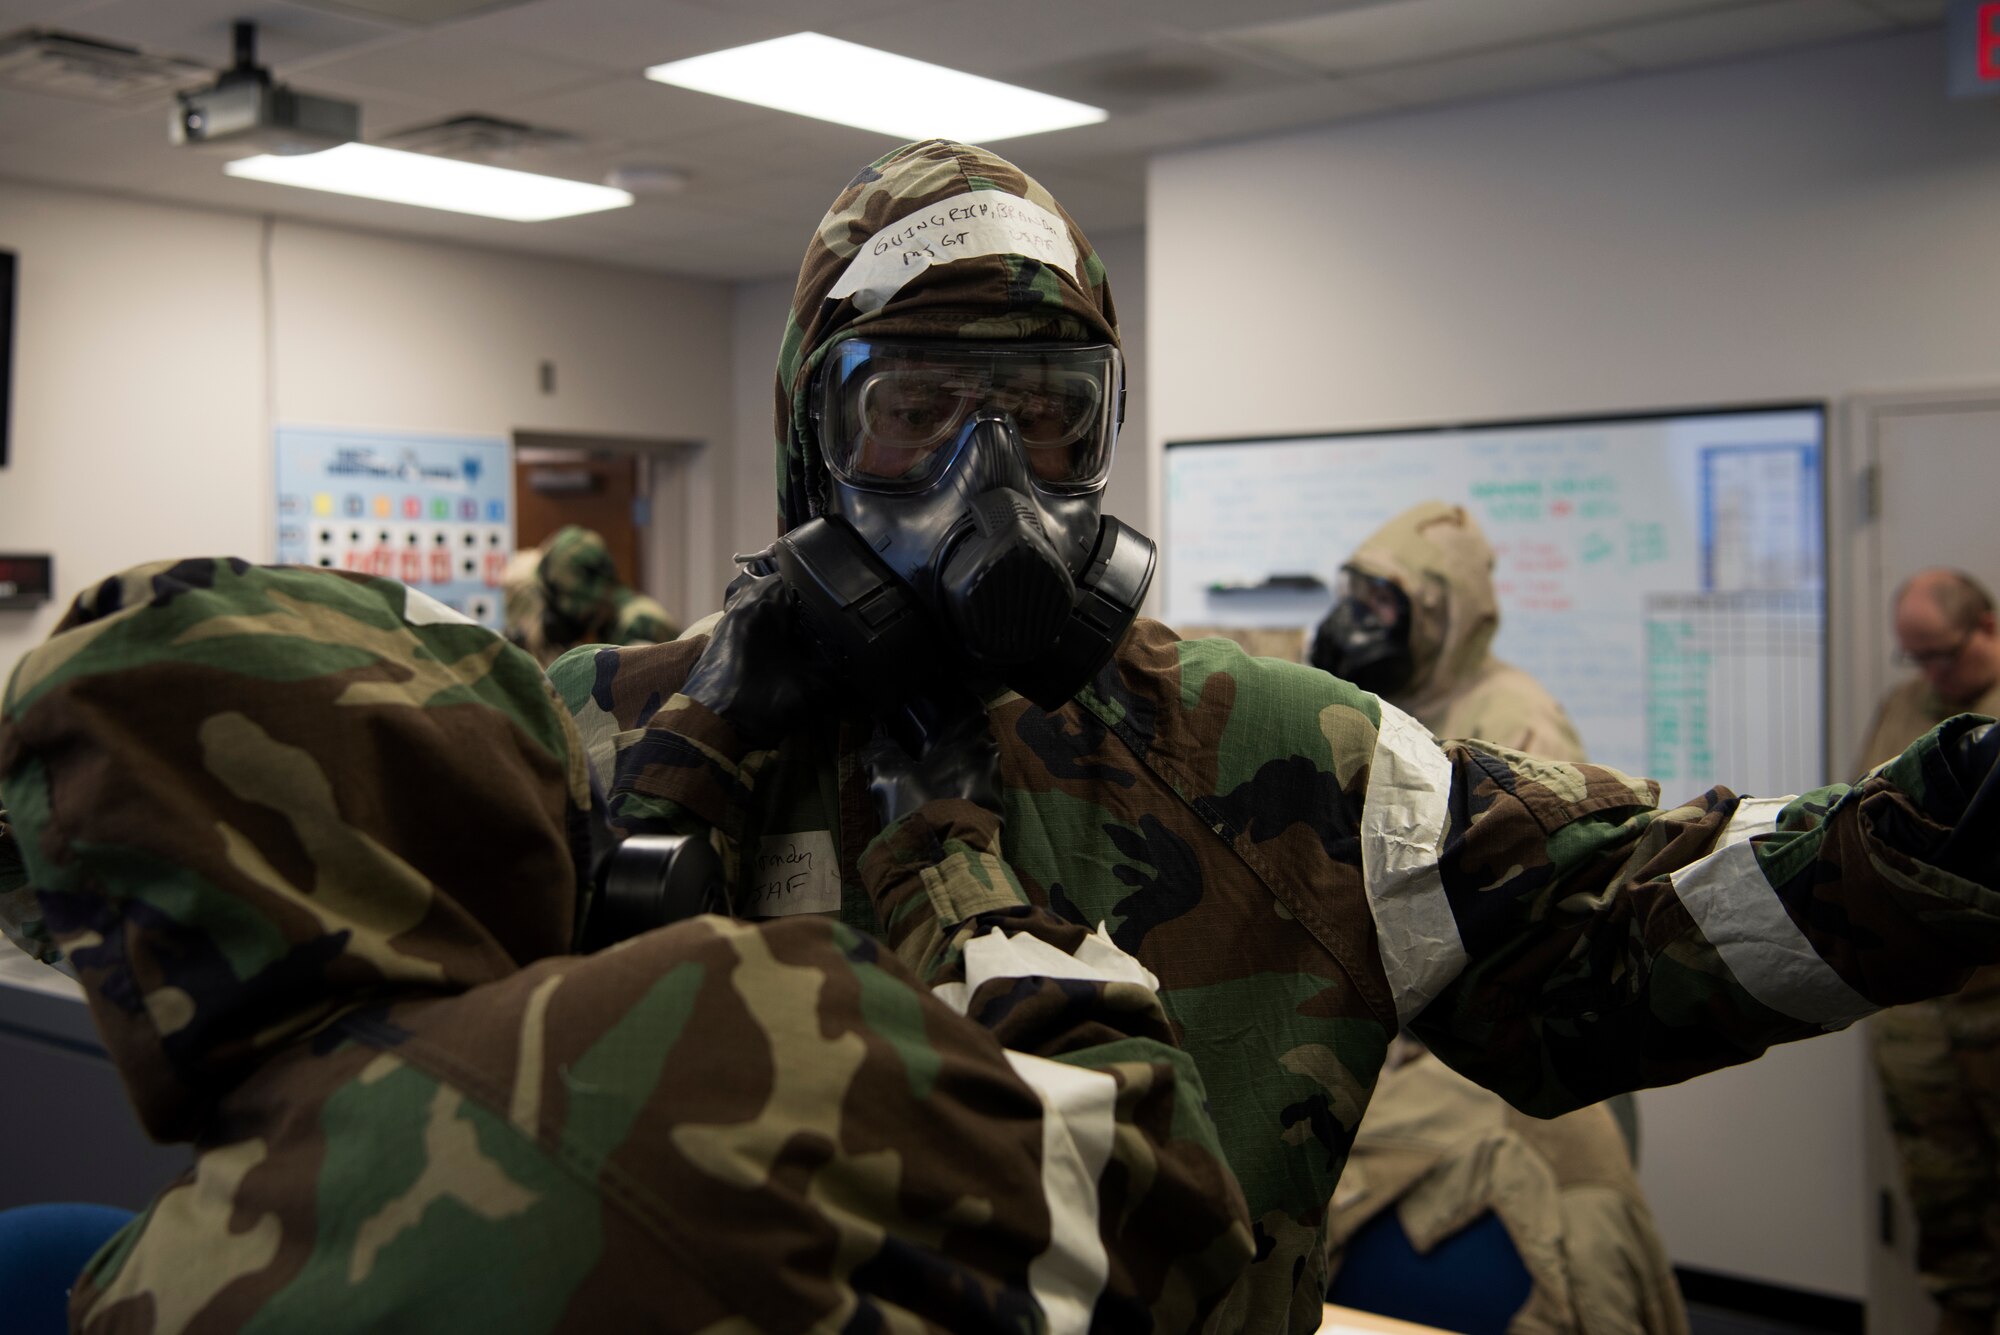 U.S. Air Force Master Sgt. Ian Ouellette, the superintendent for the 628th Air Base Wing Inspector General office, grades Airmen from the Emergency Operations Center (EOC) on how efficiently they equip Mission Oriented Protective Posture gear (MOPP), at McEntire Joint National Guard Base, S.C., Nov. 16, 2020. Palmetto Challenge is a global mobilization exercise held at McEntire Joint National Guard Base, S.C., and Pope Army Airfield, N.C. The exercise is held in order to develop readiness and awareness in a simulated deployed environment for over 100 Airmen from Joint Base Charleston.